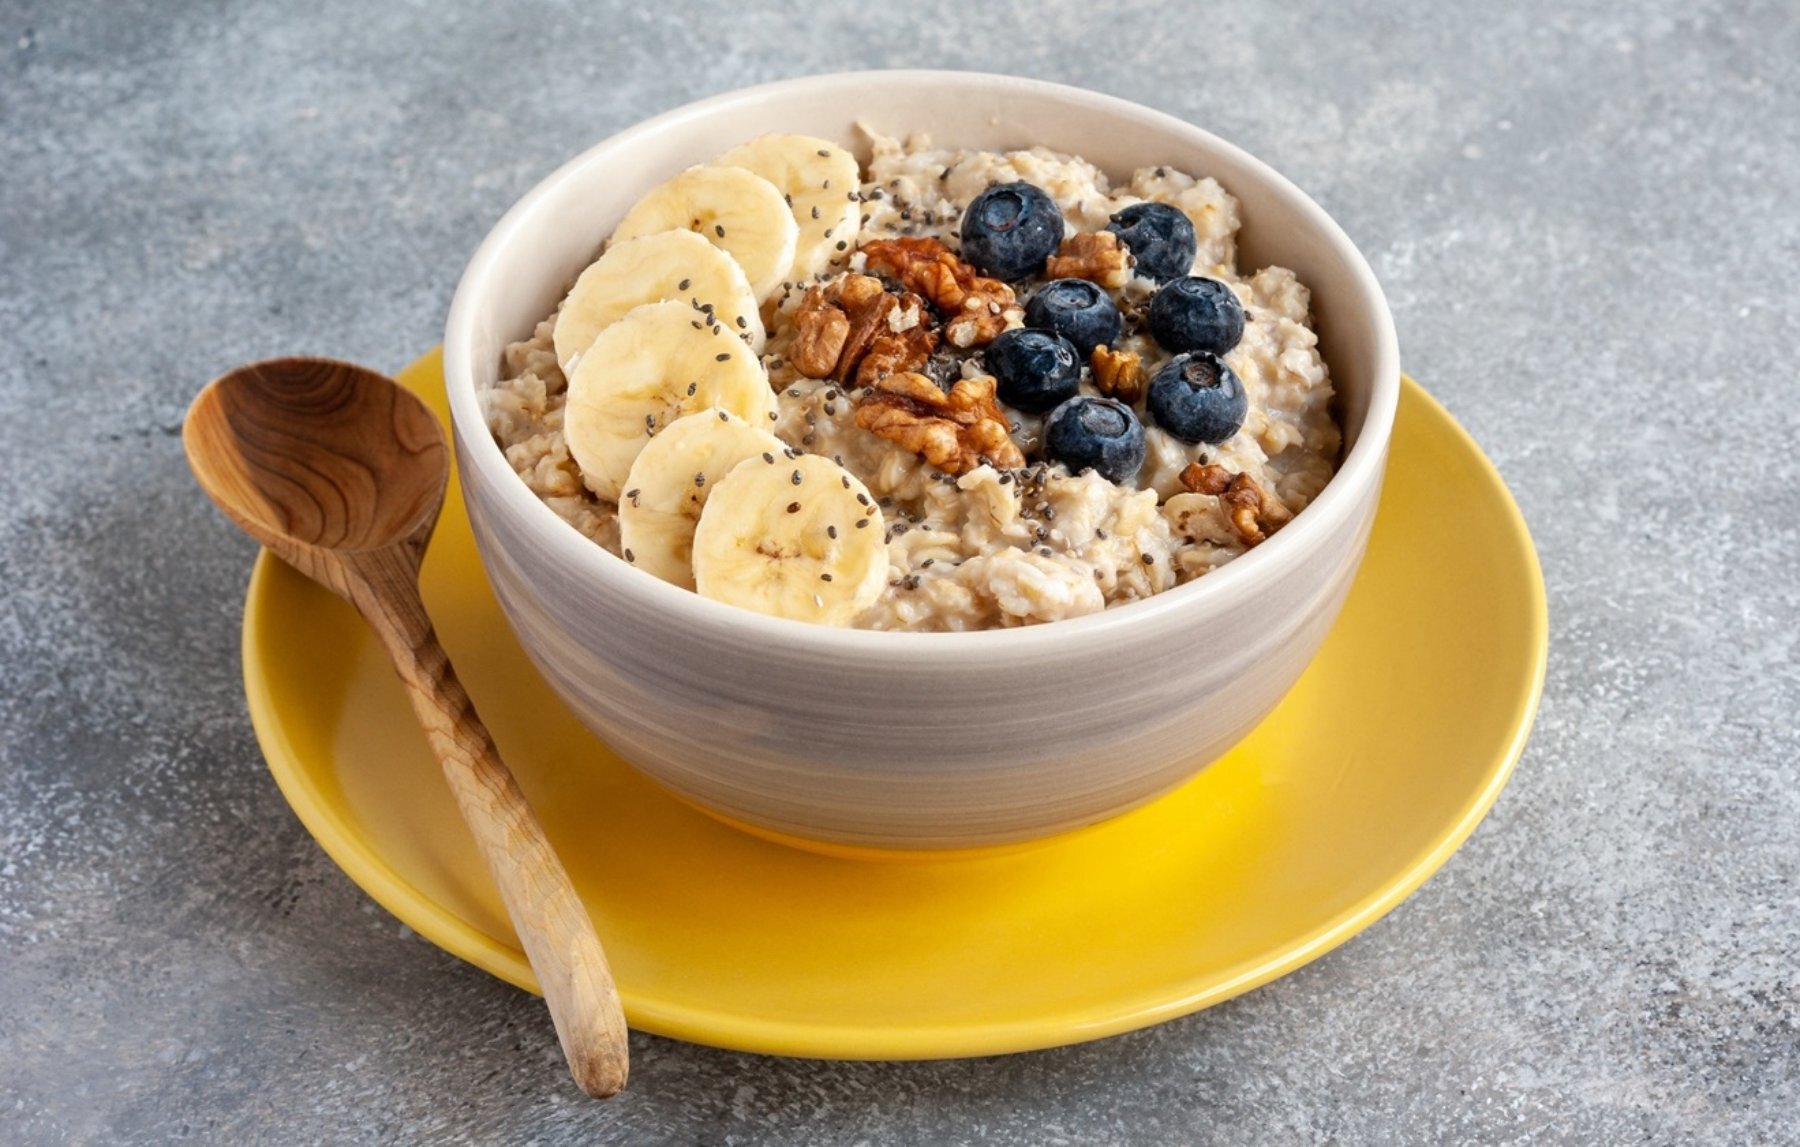 This is not your grandmothers oatmeal or a quick breakfast using instant oats - photo 7